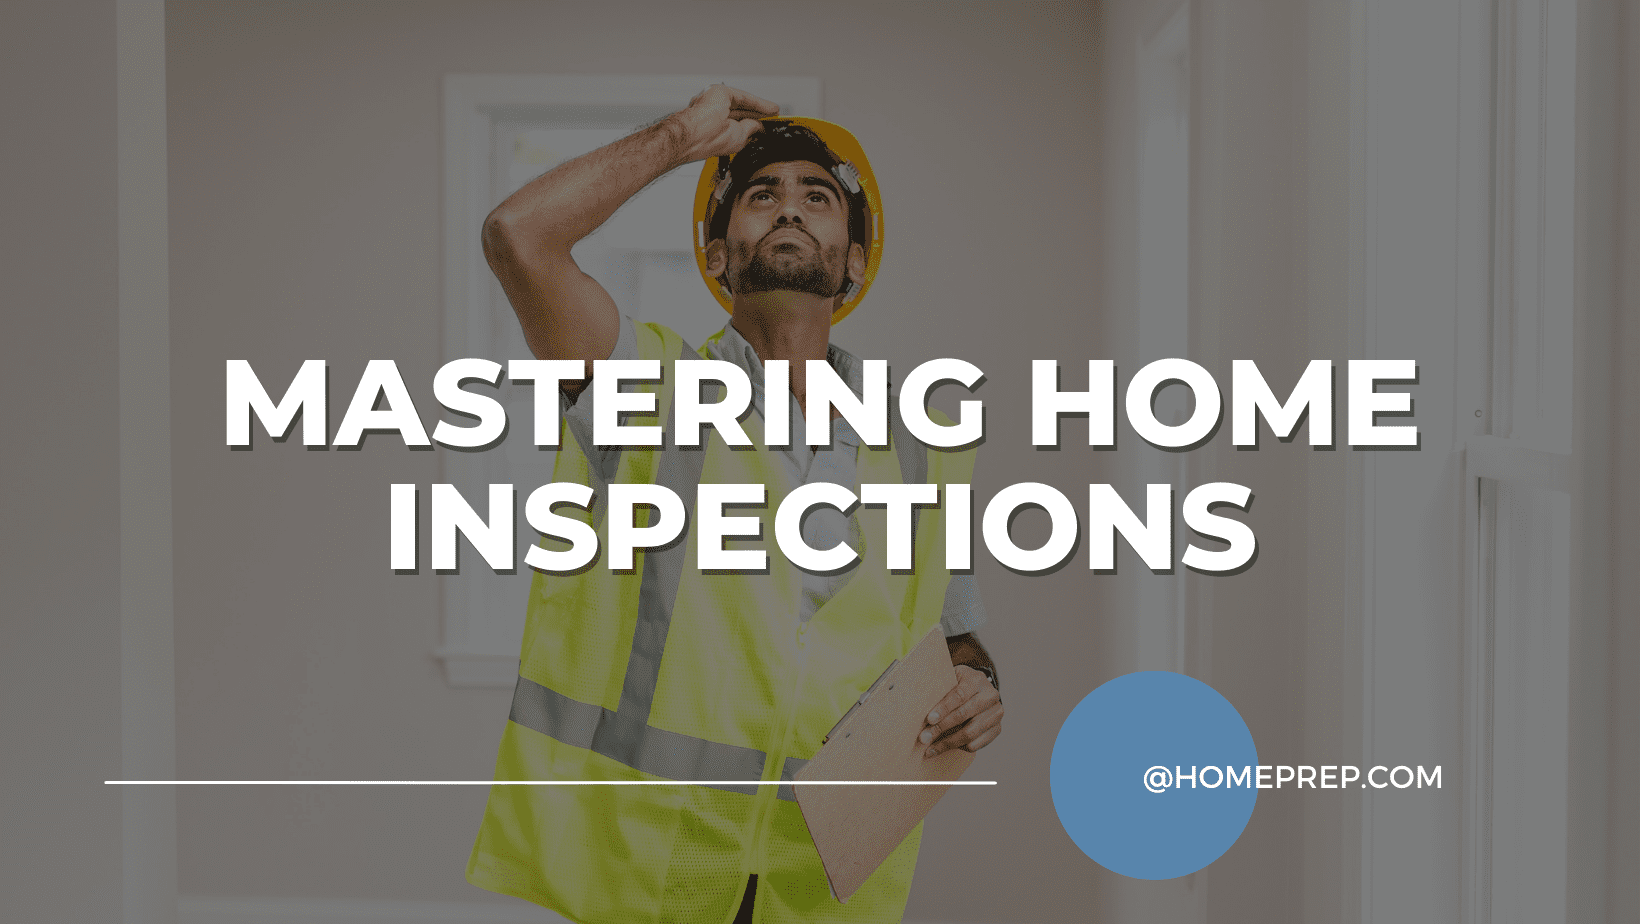 Mastering Home Inspection: Your Path to Becoming a Certified Home Inspector with @HomePrep